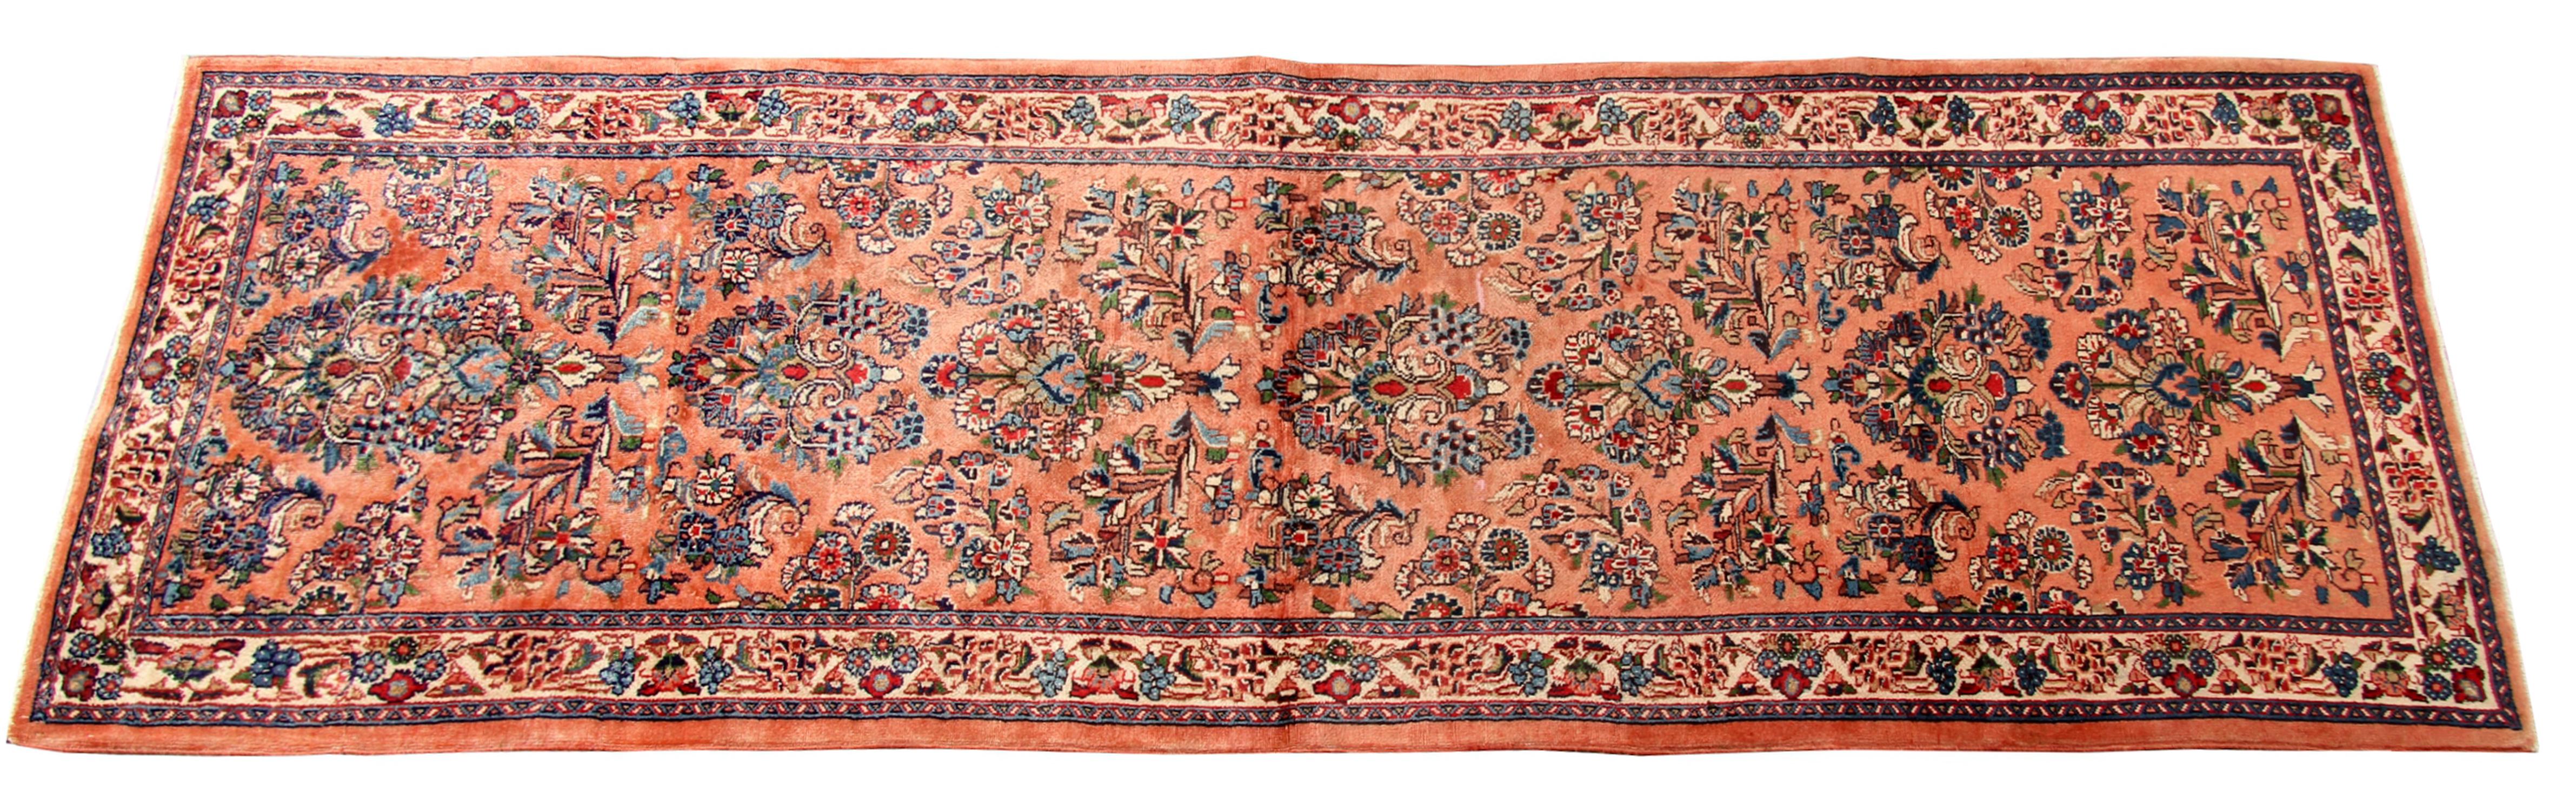 This elegant rust vintage rug has been woven on a pink-orange background with a highly decorative repeat pattern border featuring blue, brown, and red accents. An intricate floral border then encloses this. Both the colour palette and sophisticated